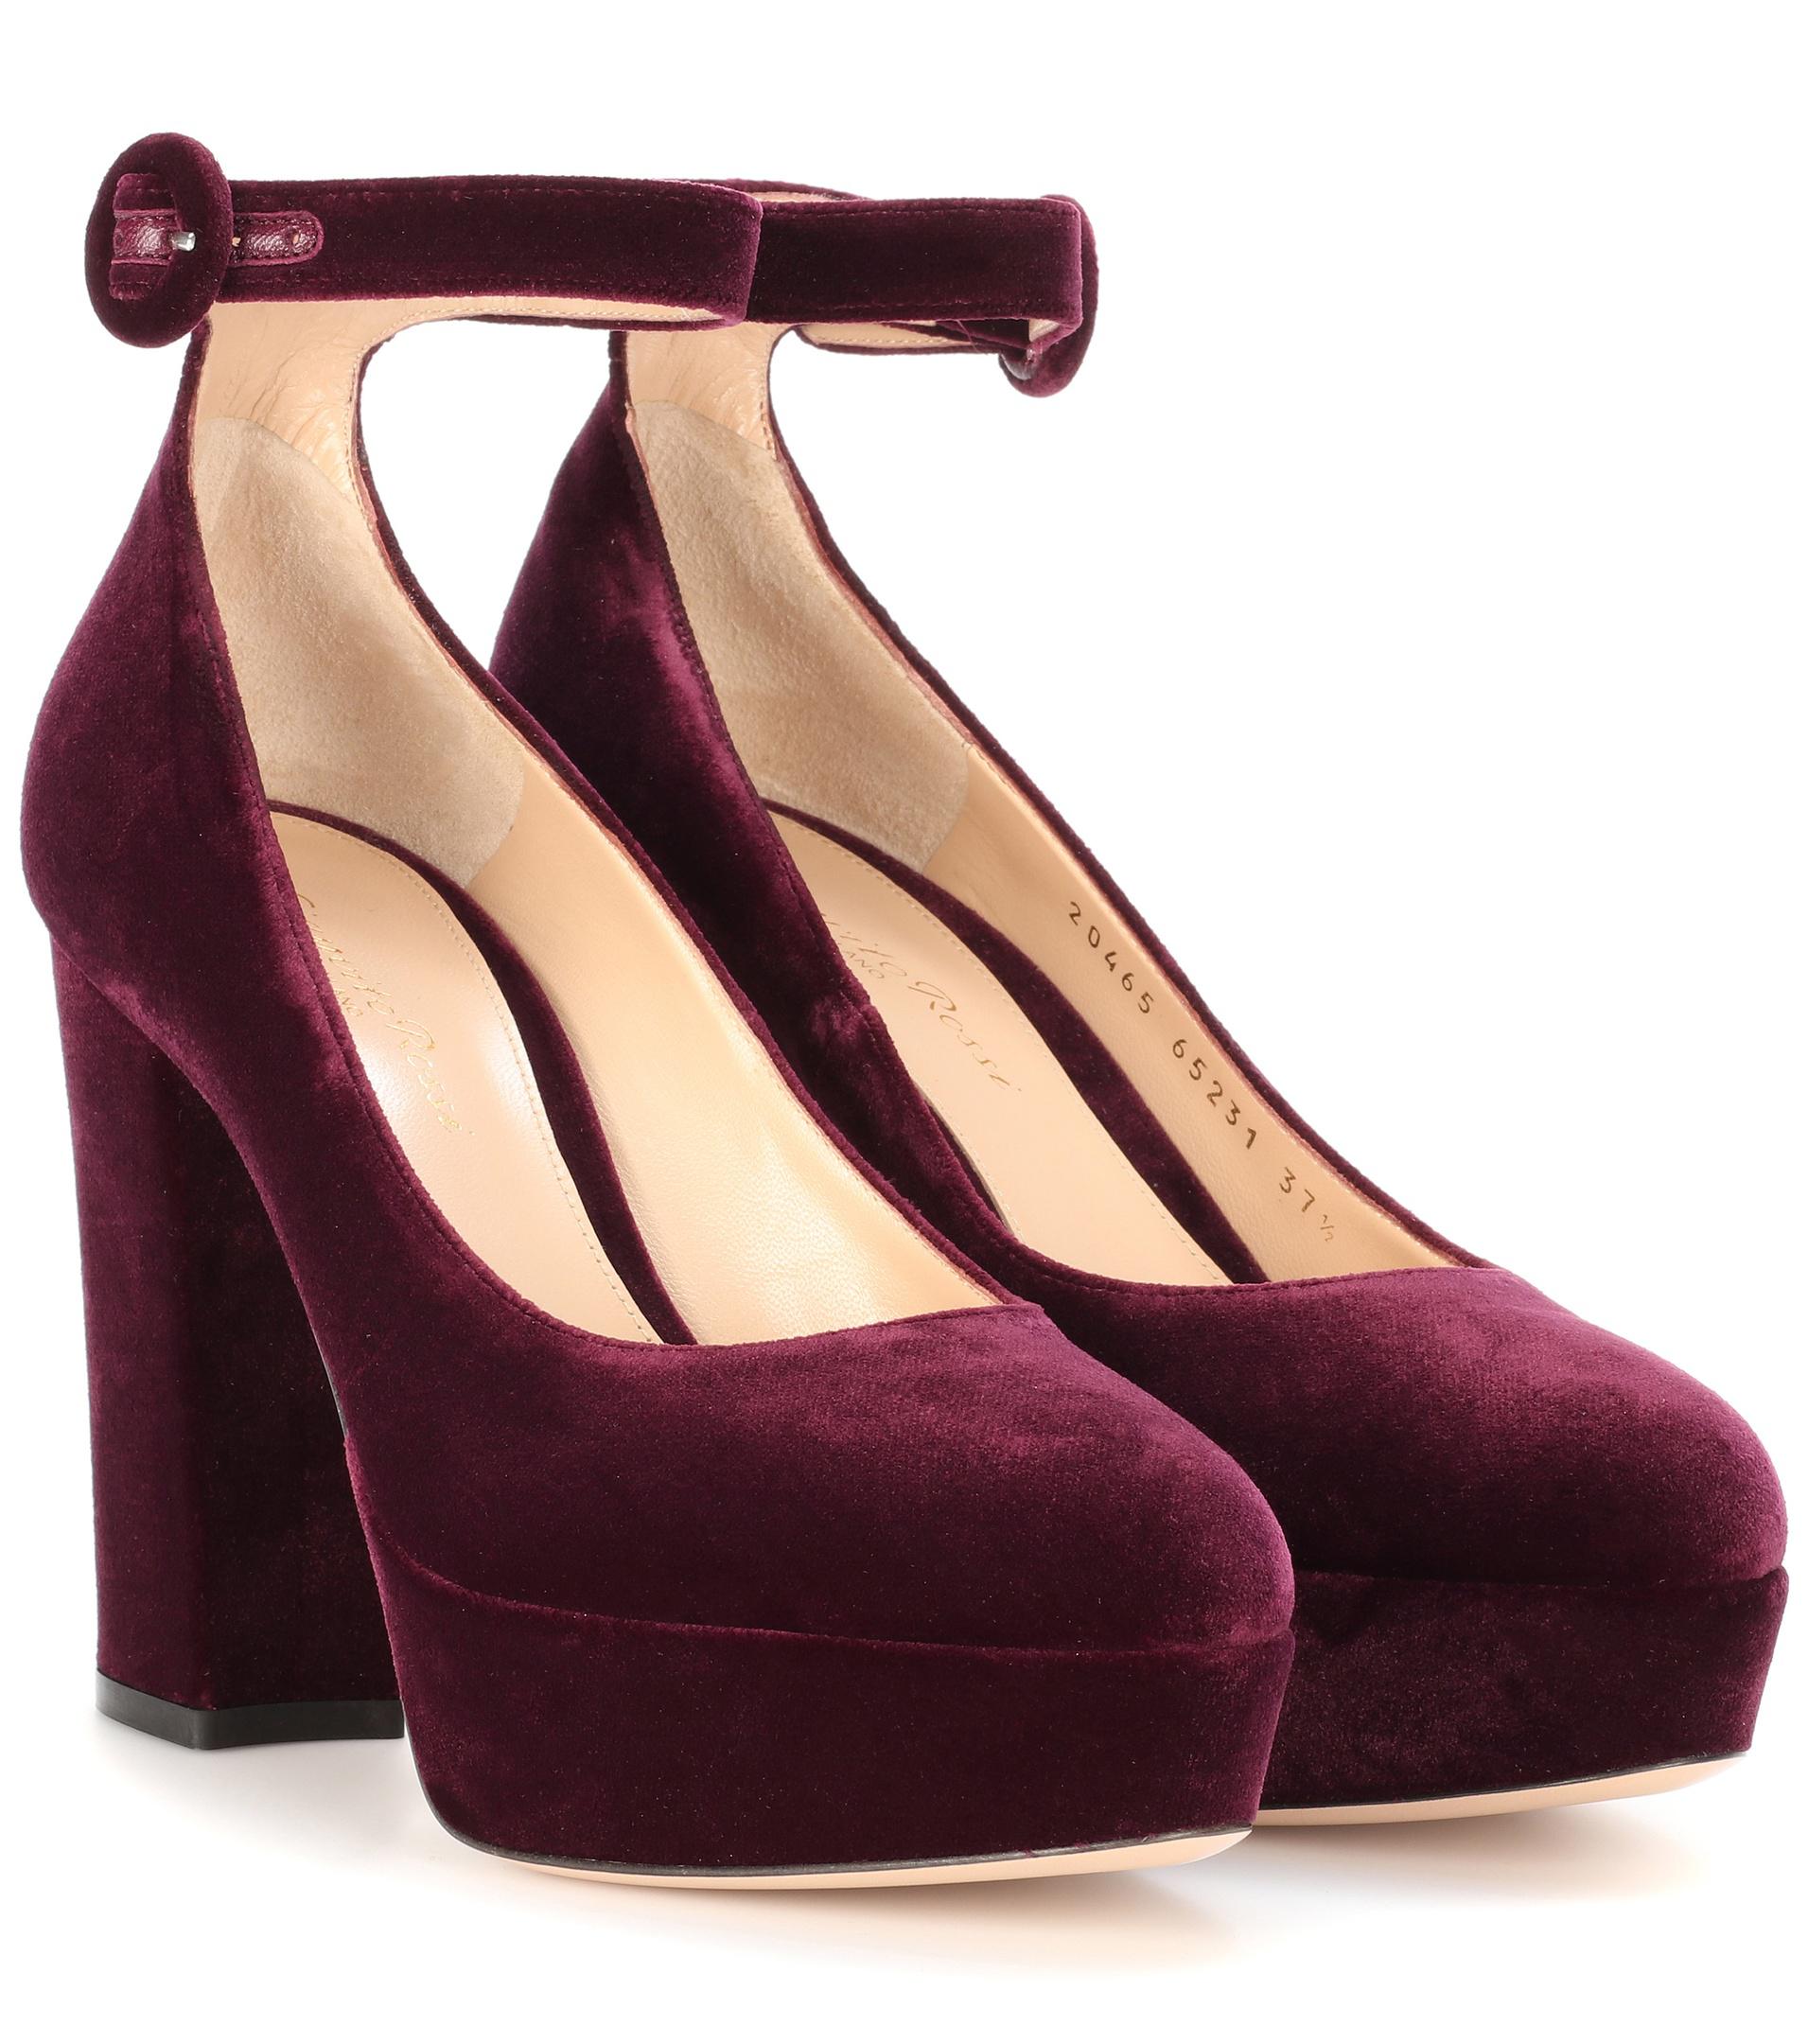 Gianvito Rossi Sherry Velvet Pumps in Purple - Save 44% - Lyst